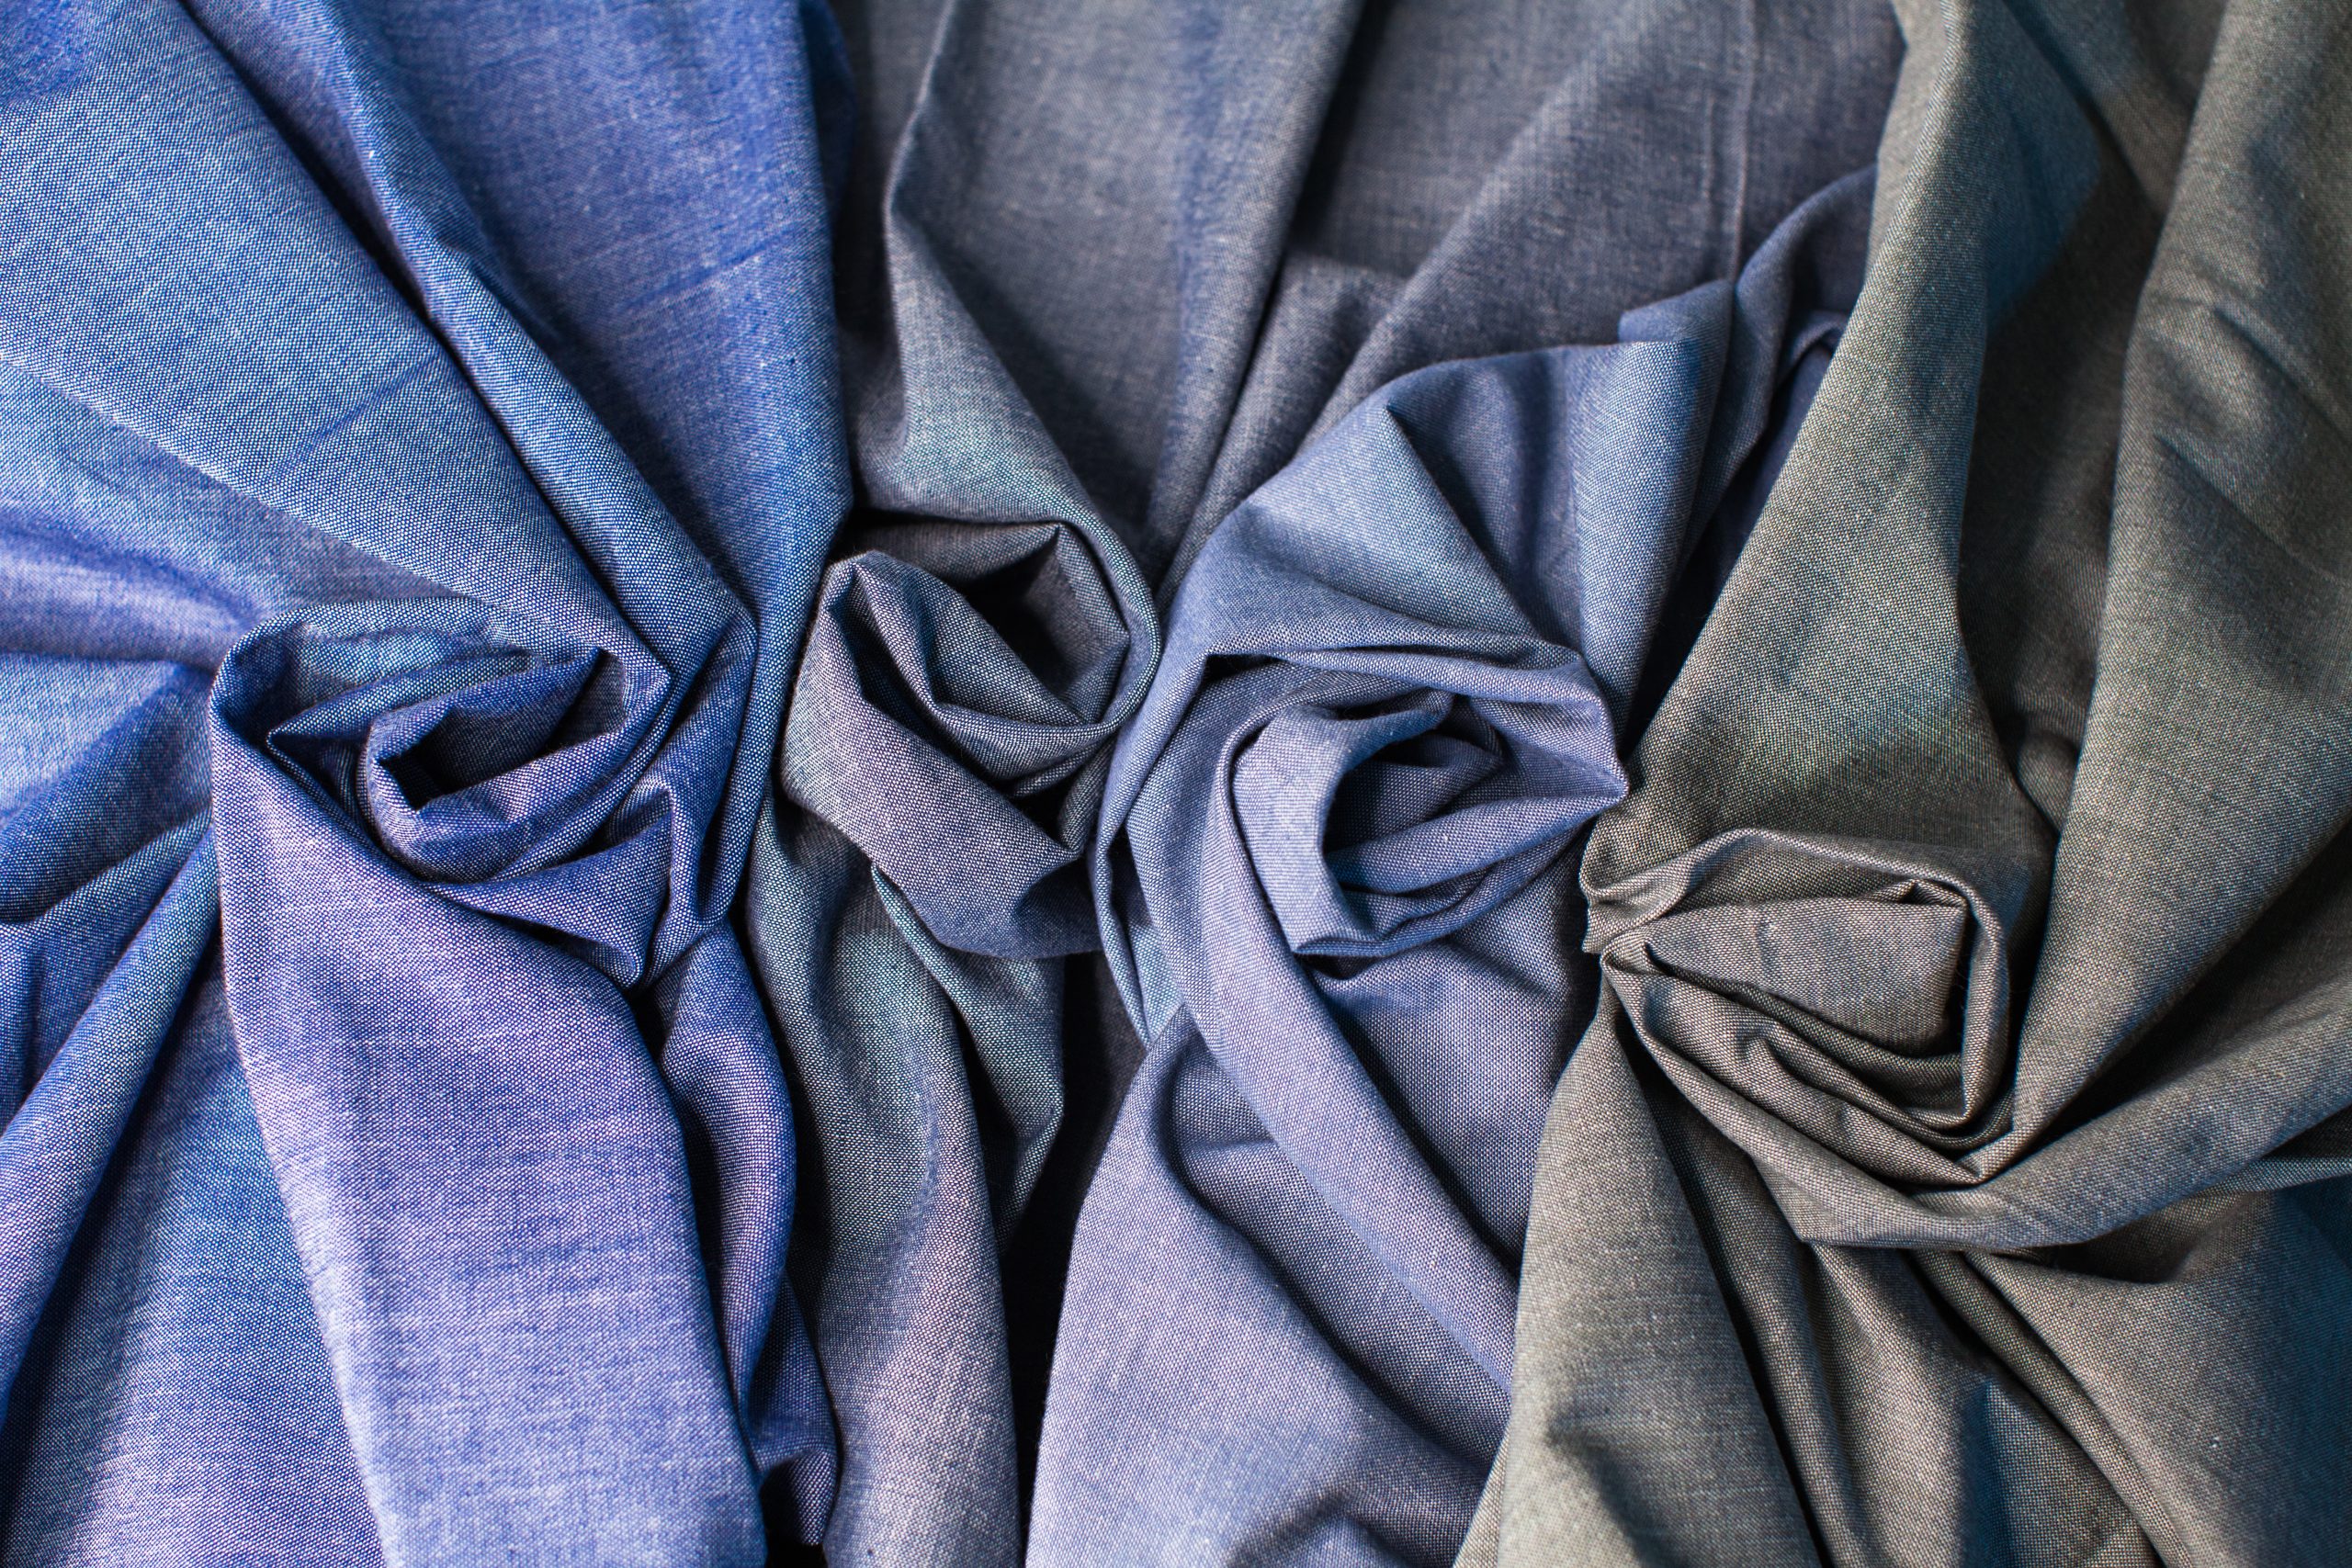 photograph-from-above-four-blue-selvedge-textiles-next-to-each-other